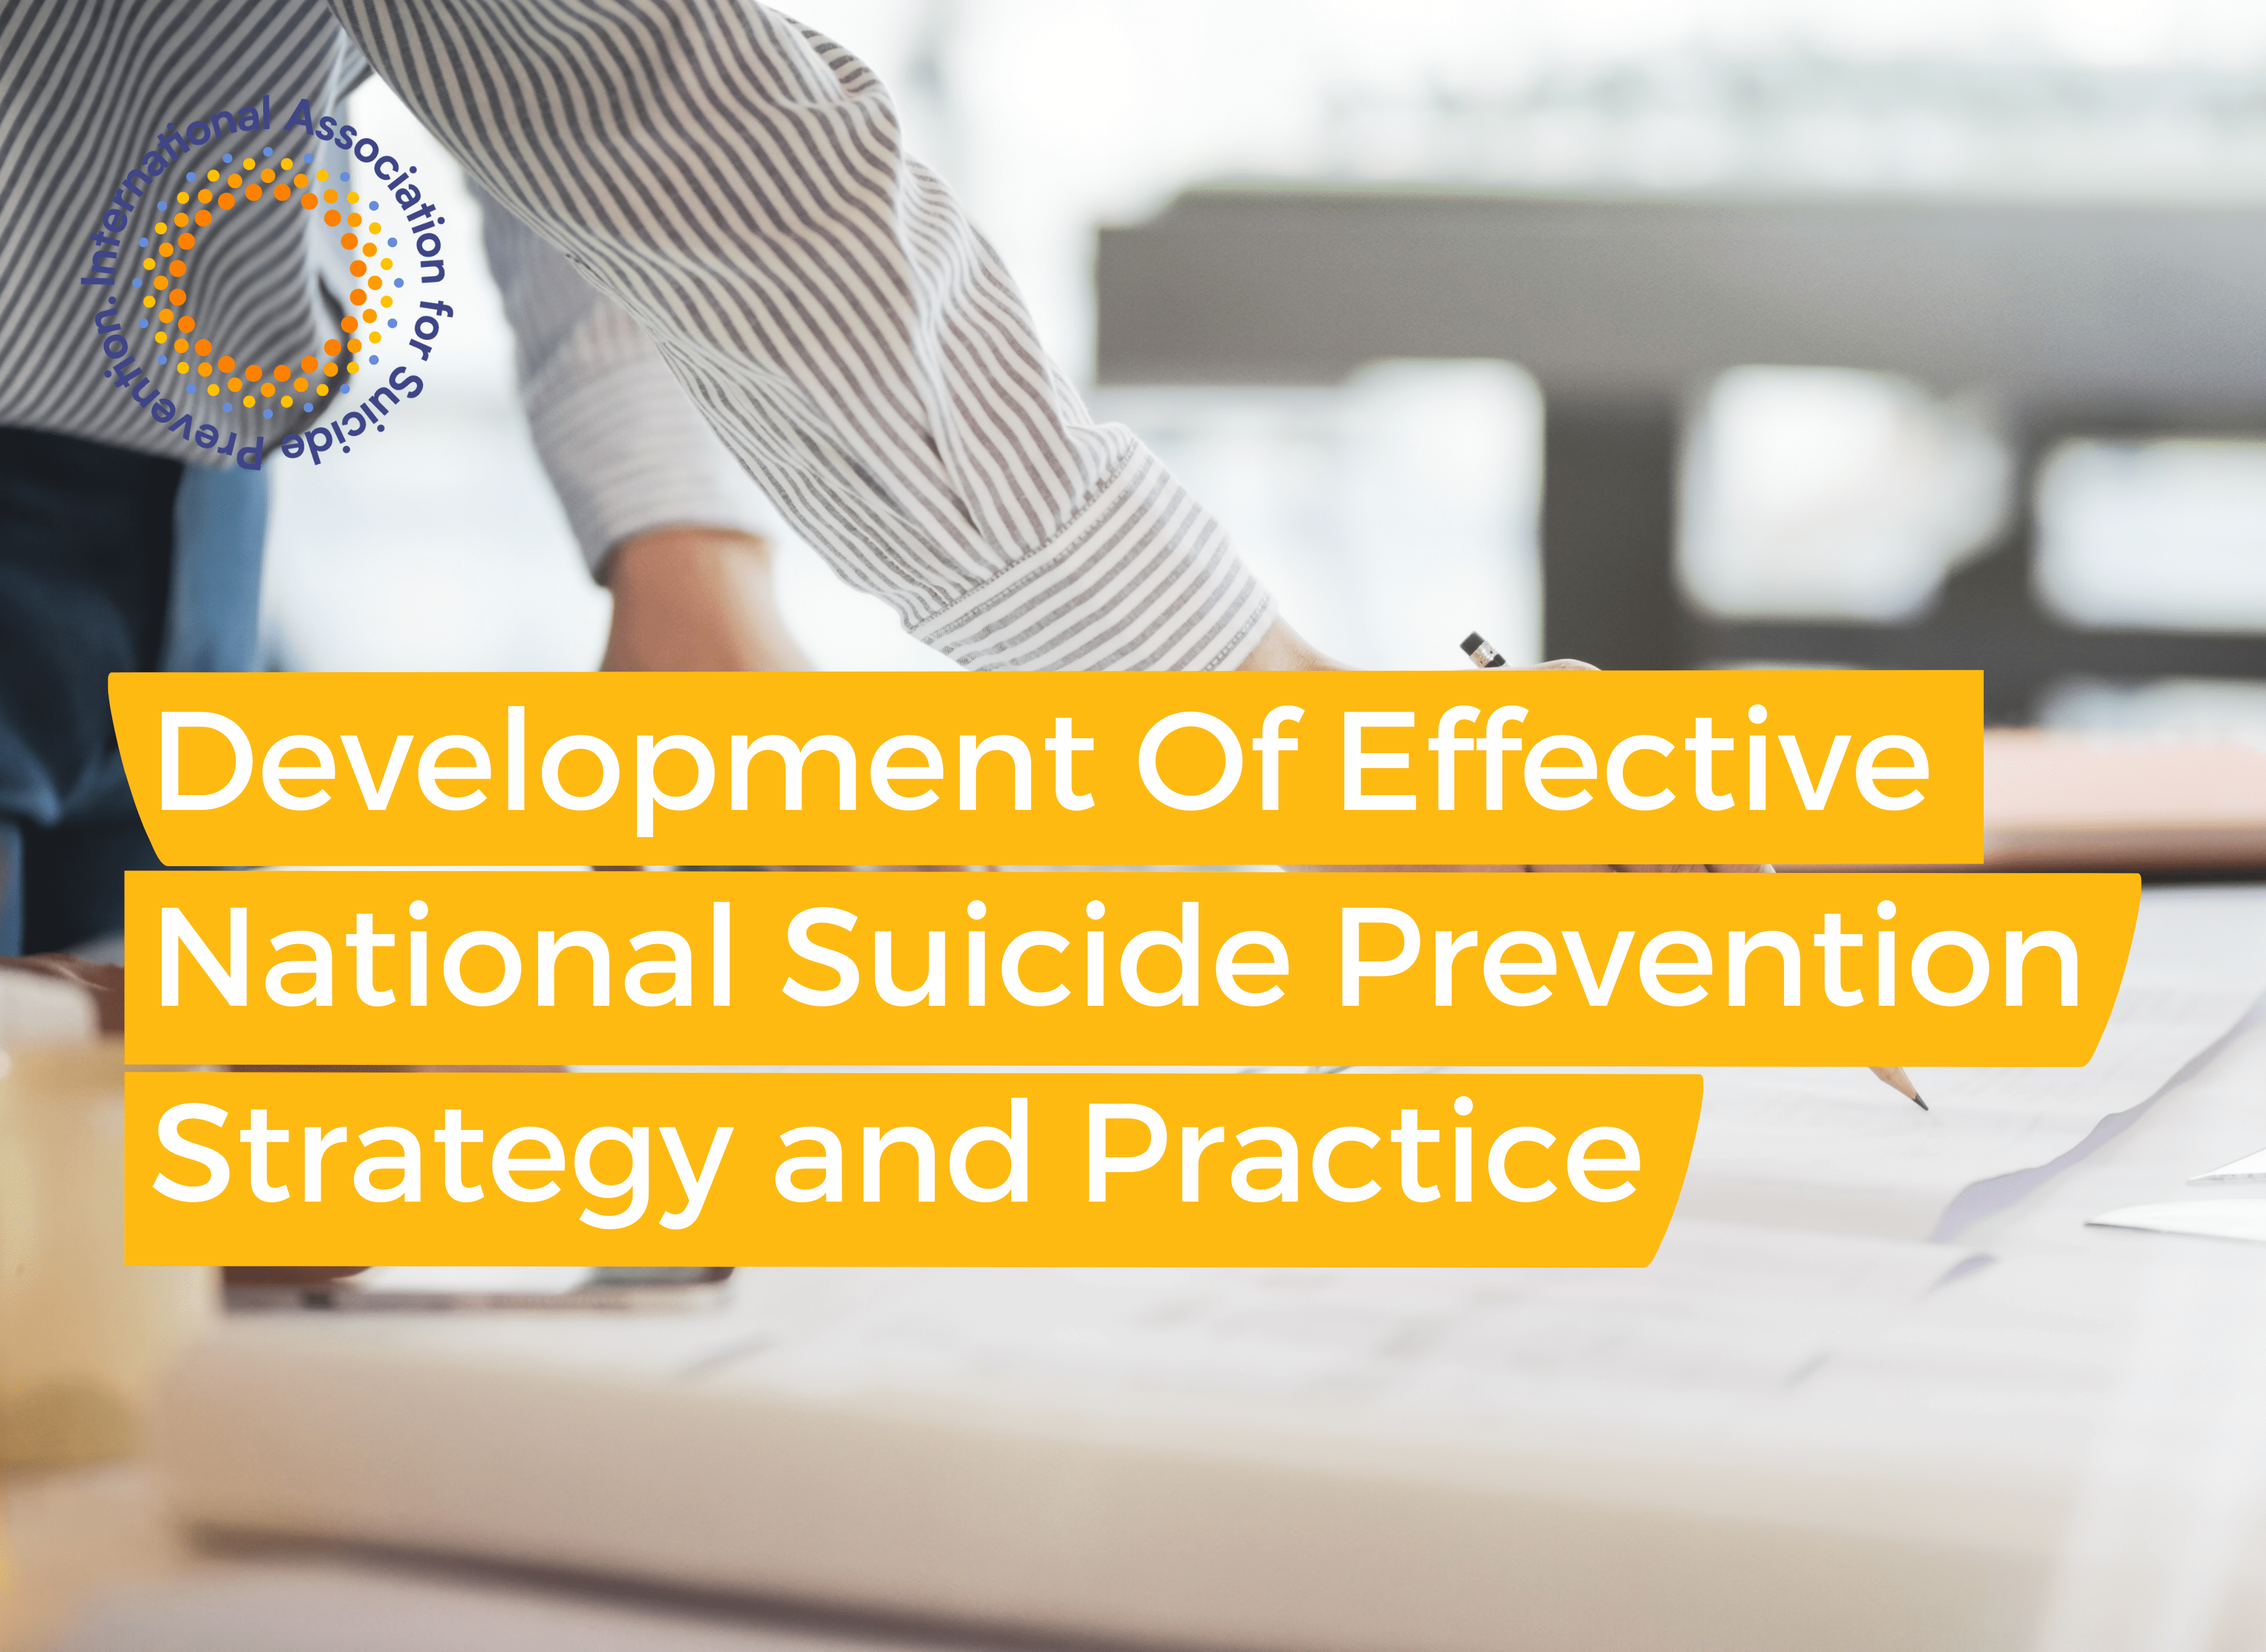 Development of Effective National Suicide Prevention Strategy and Practice